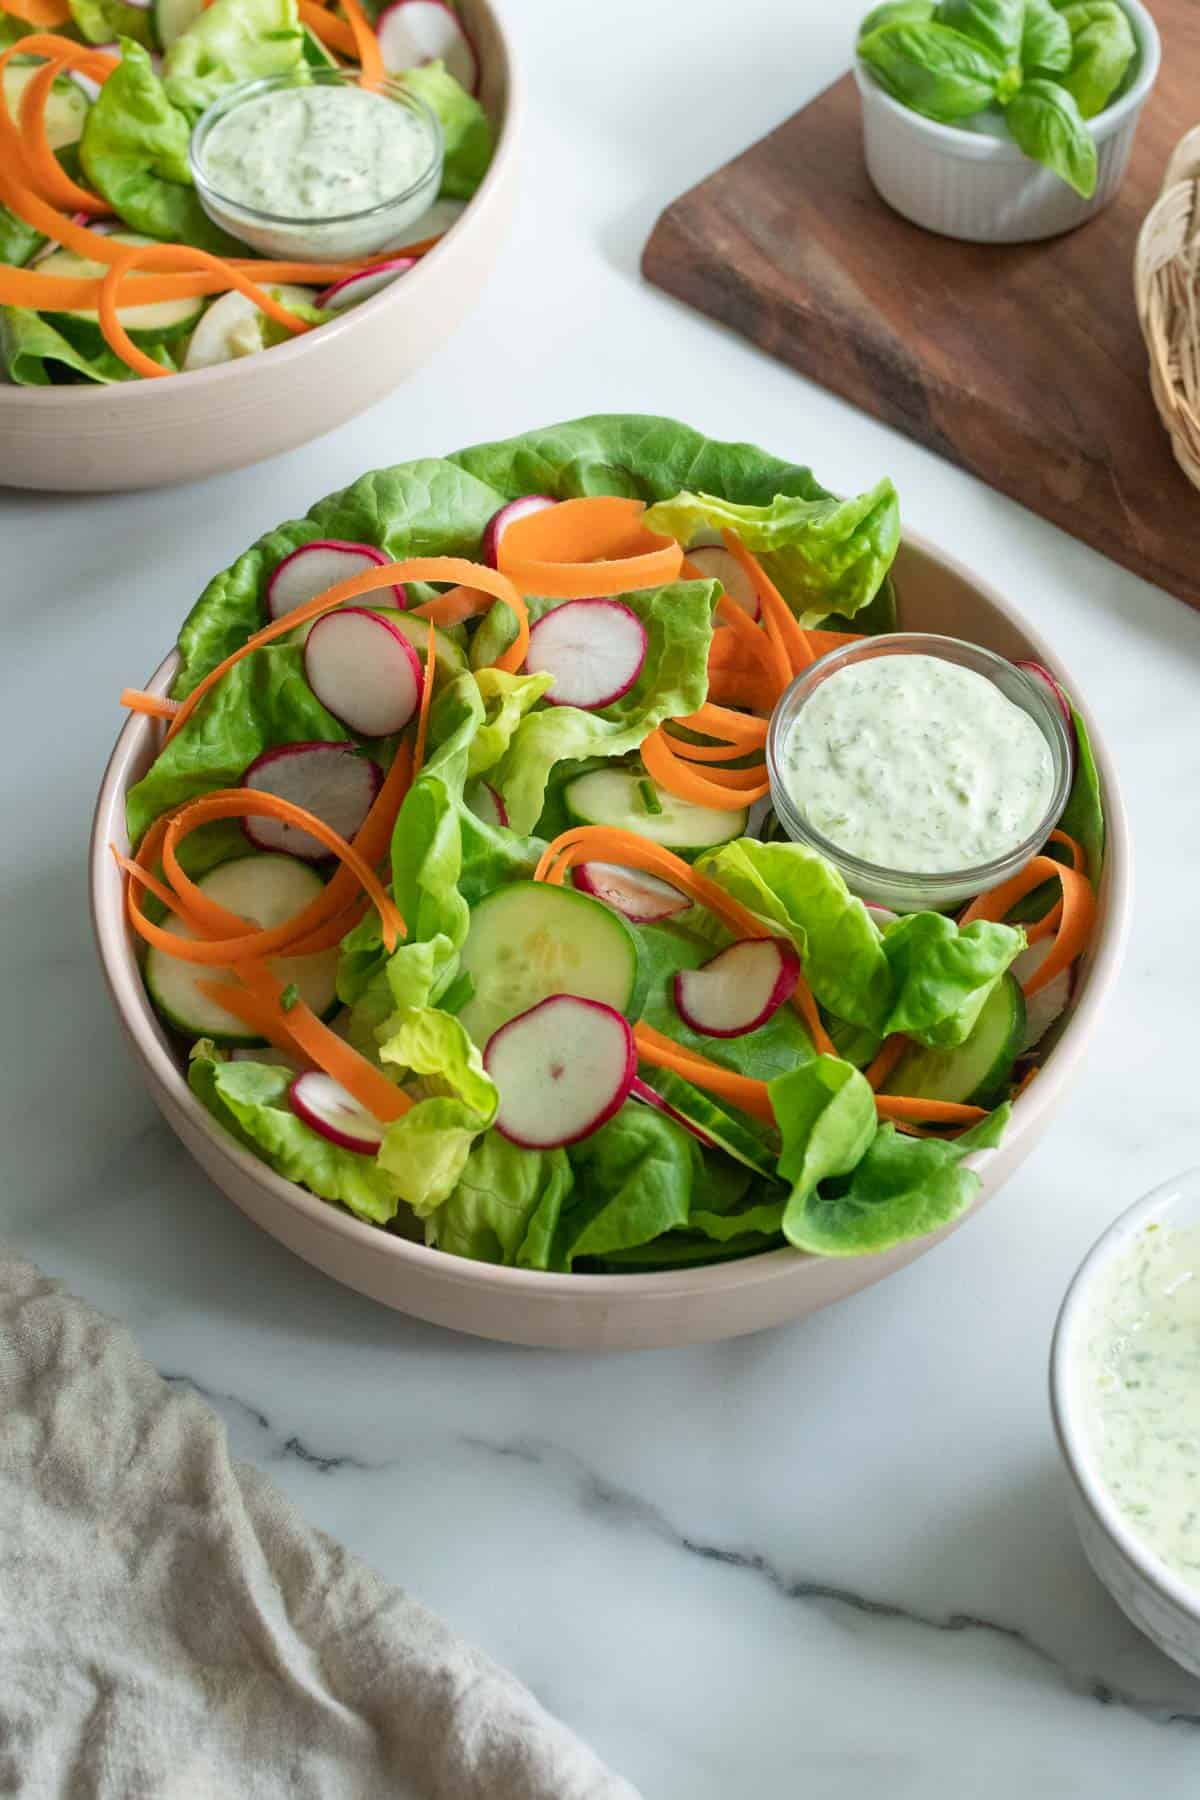 A bibb lettuce salad in a bowl with a creamy dressing on the side.